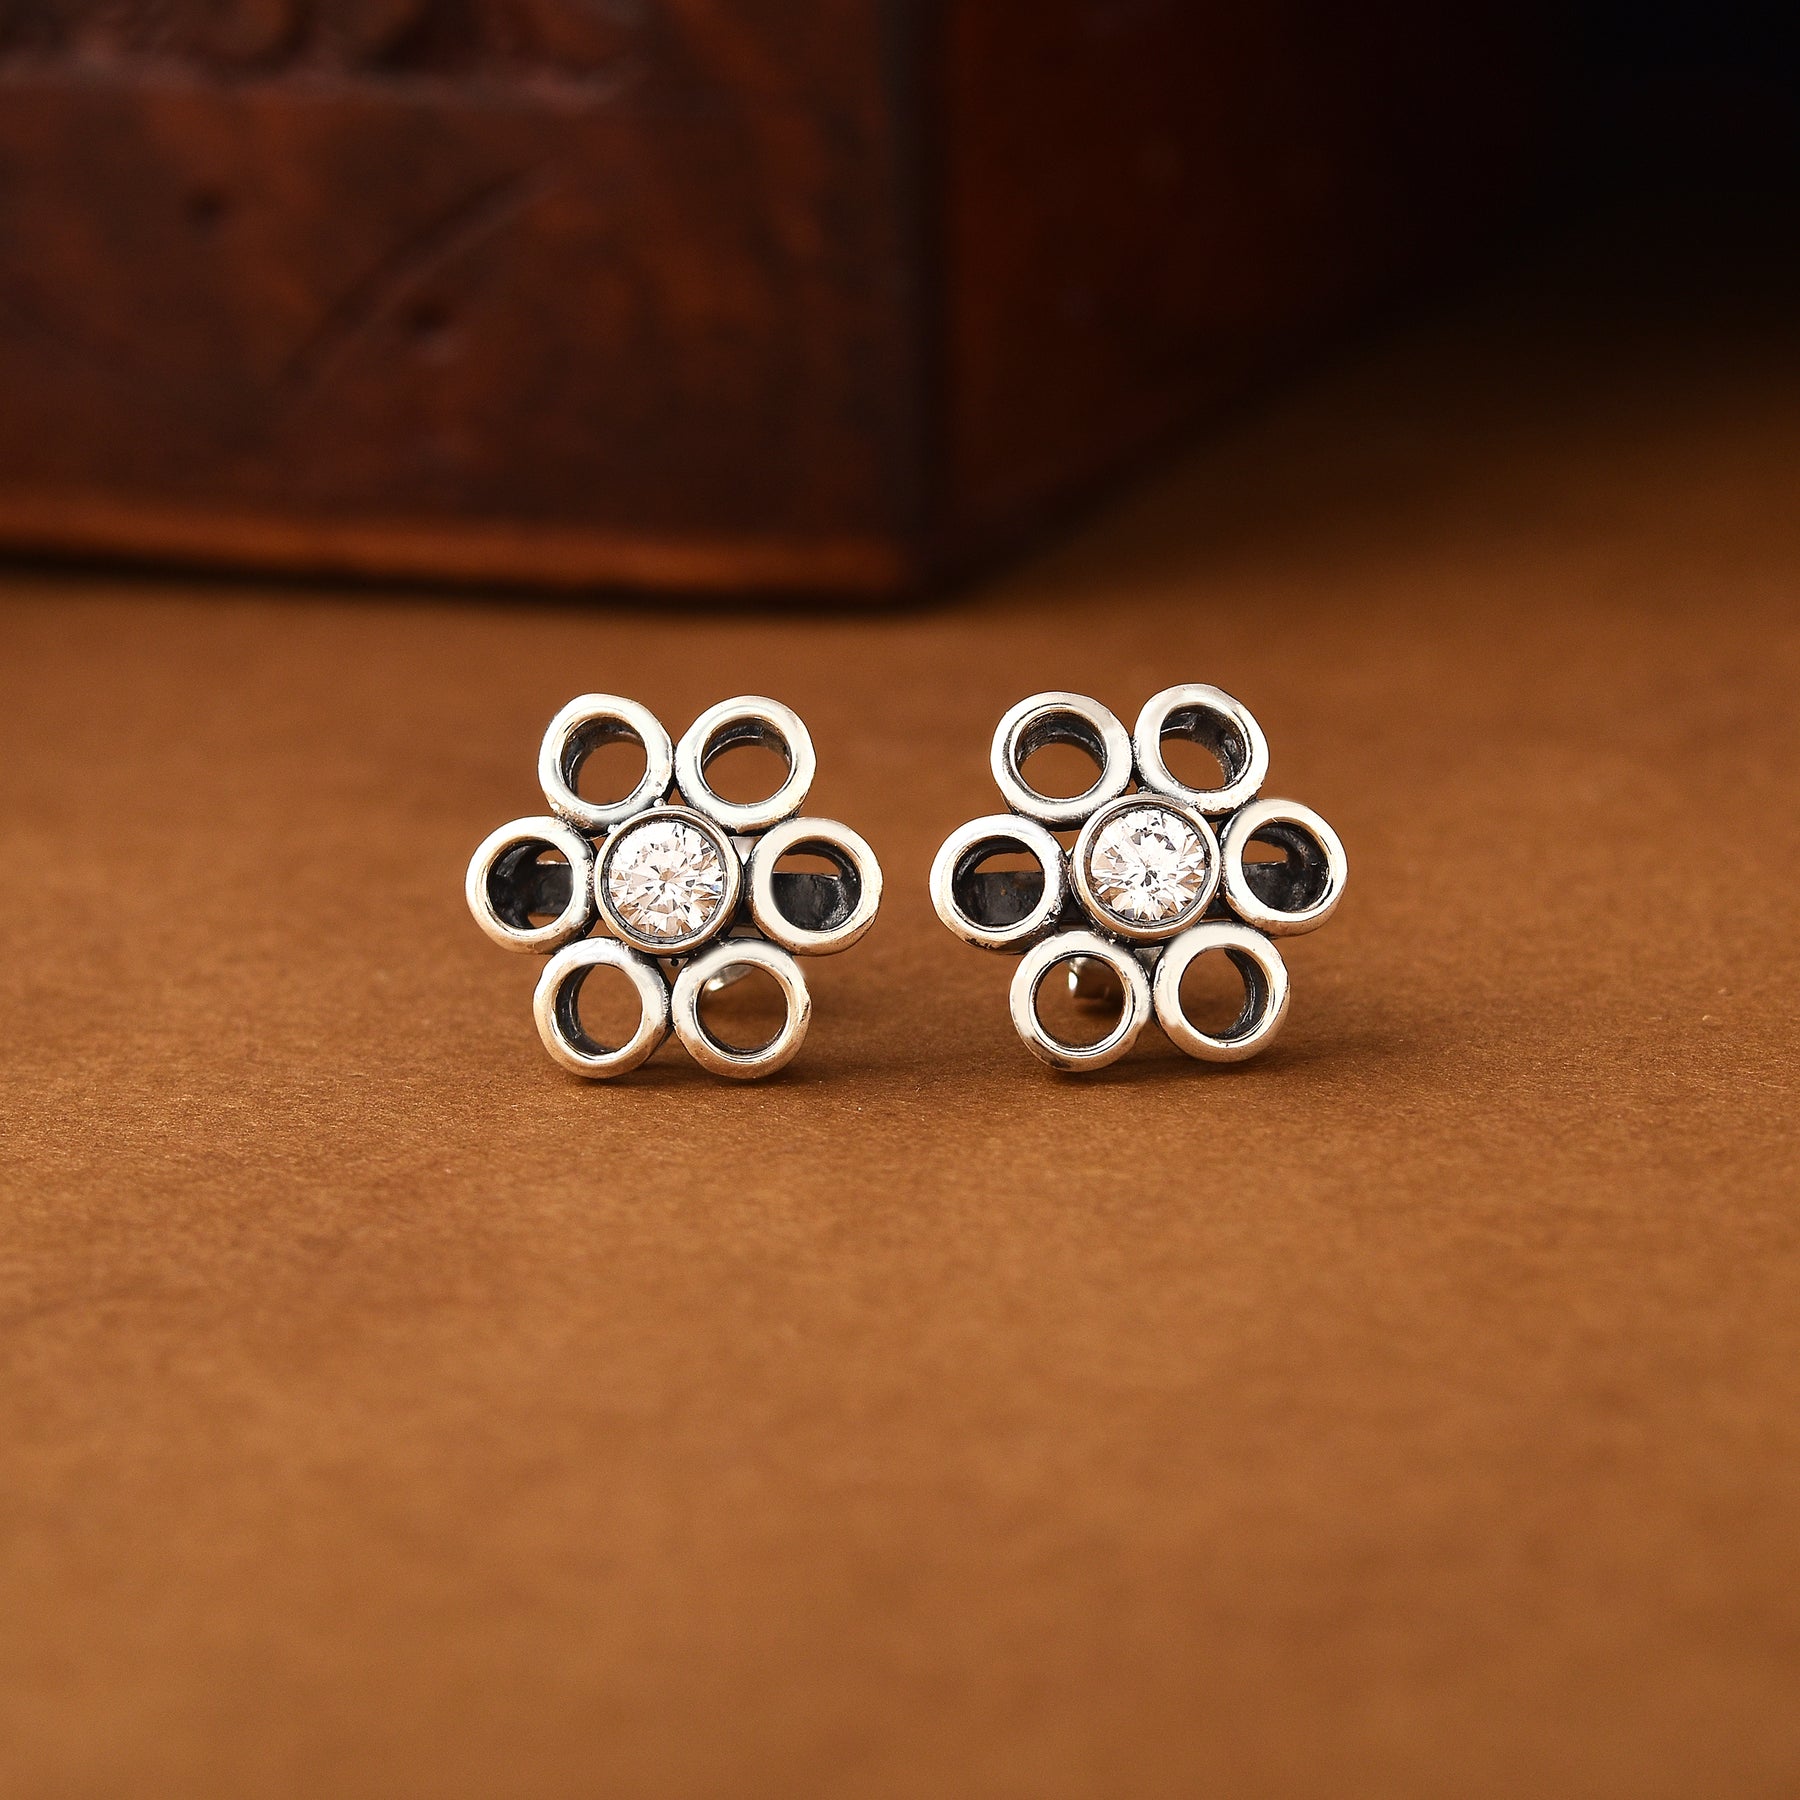 Silver Oxidized Sunflower Pendant With Stud Earrings